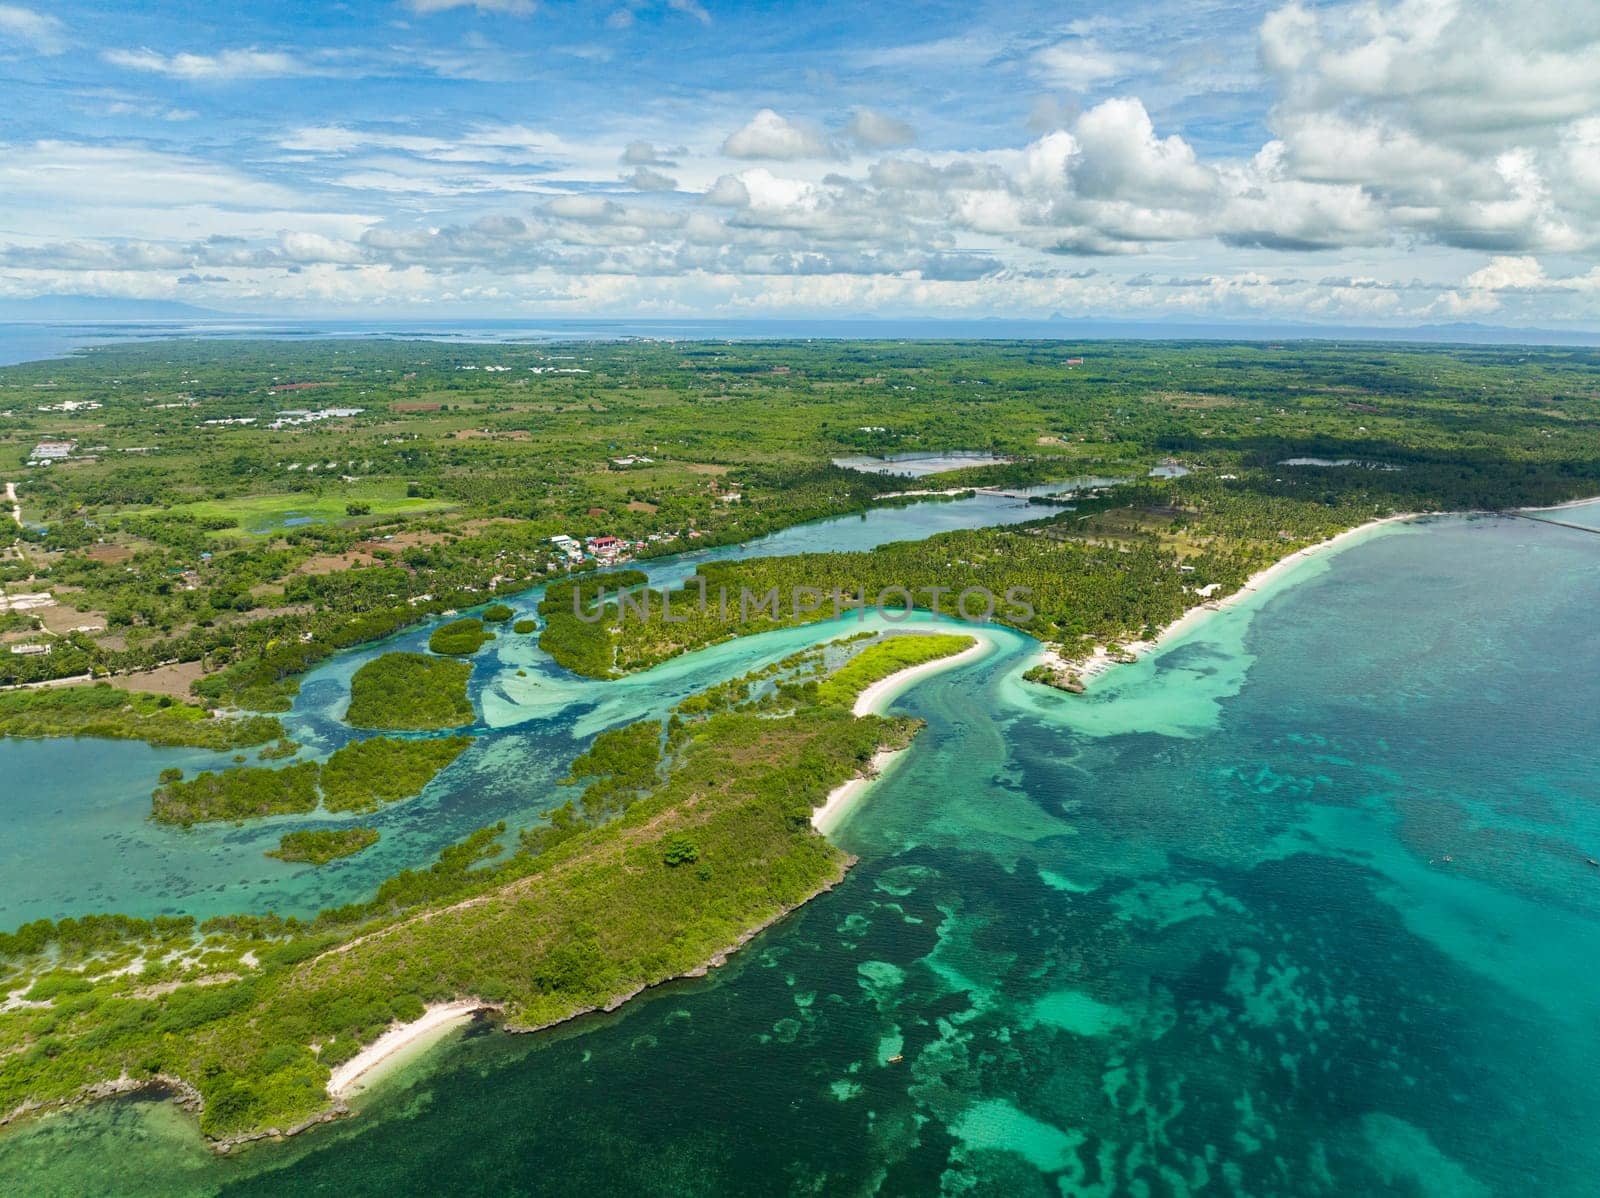 Aerial view of tropical island and beach in the sea. Bantayan island, Philippines.